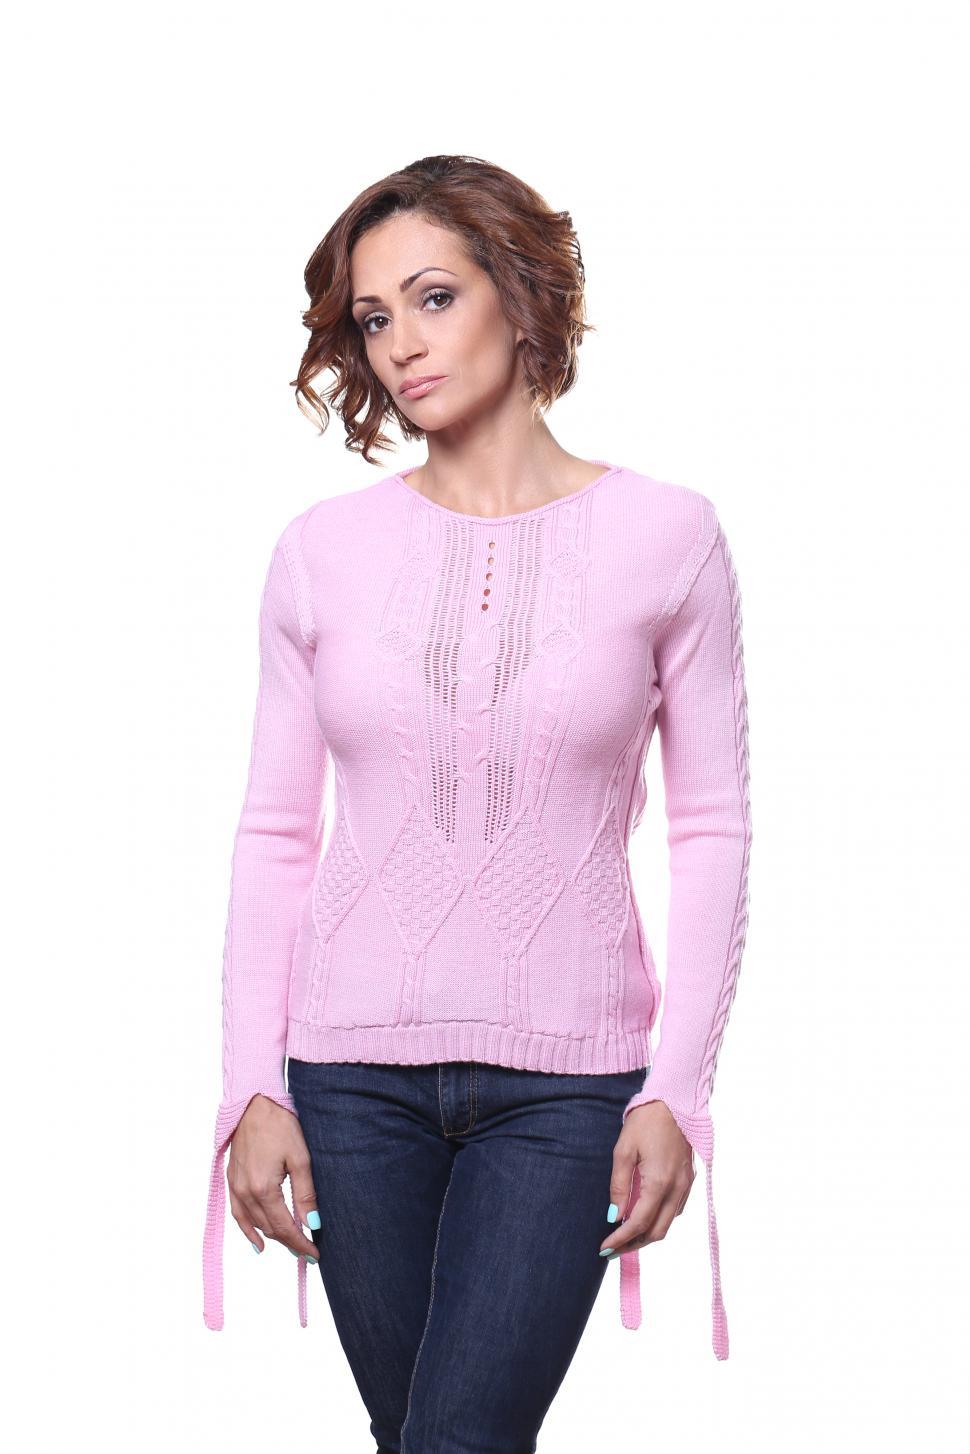 Free Image of Woman in pink knit sweater 